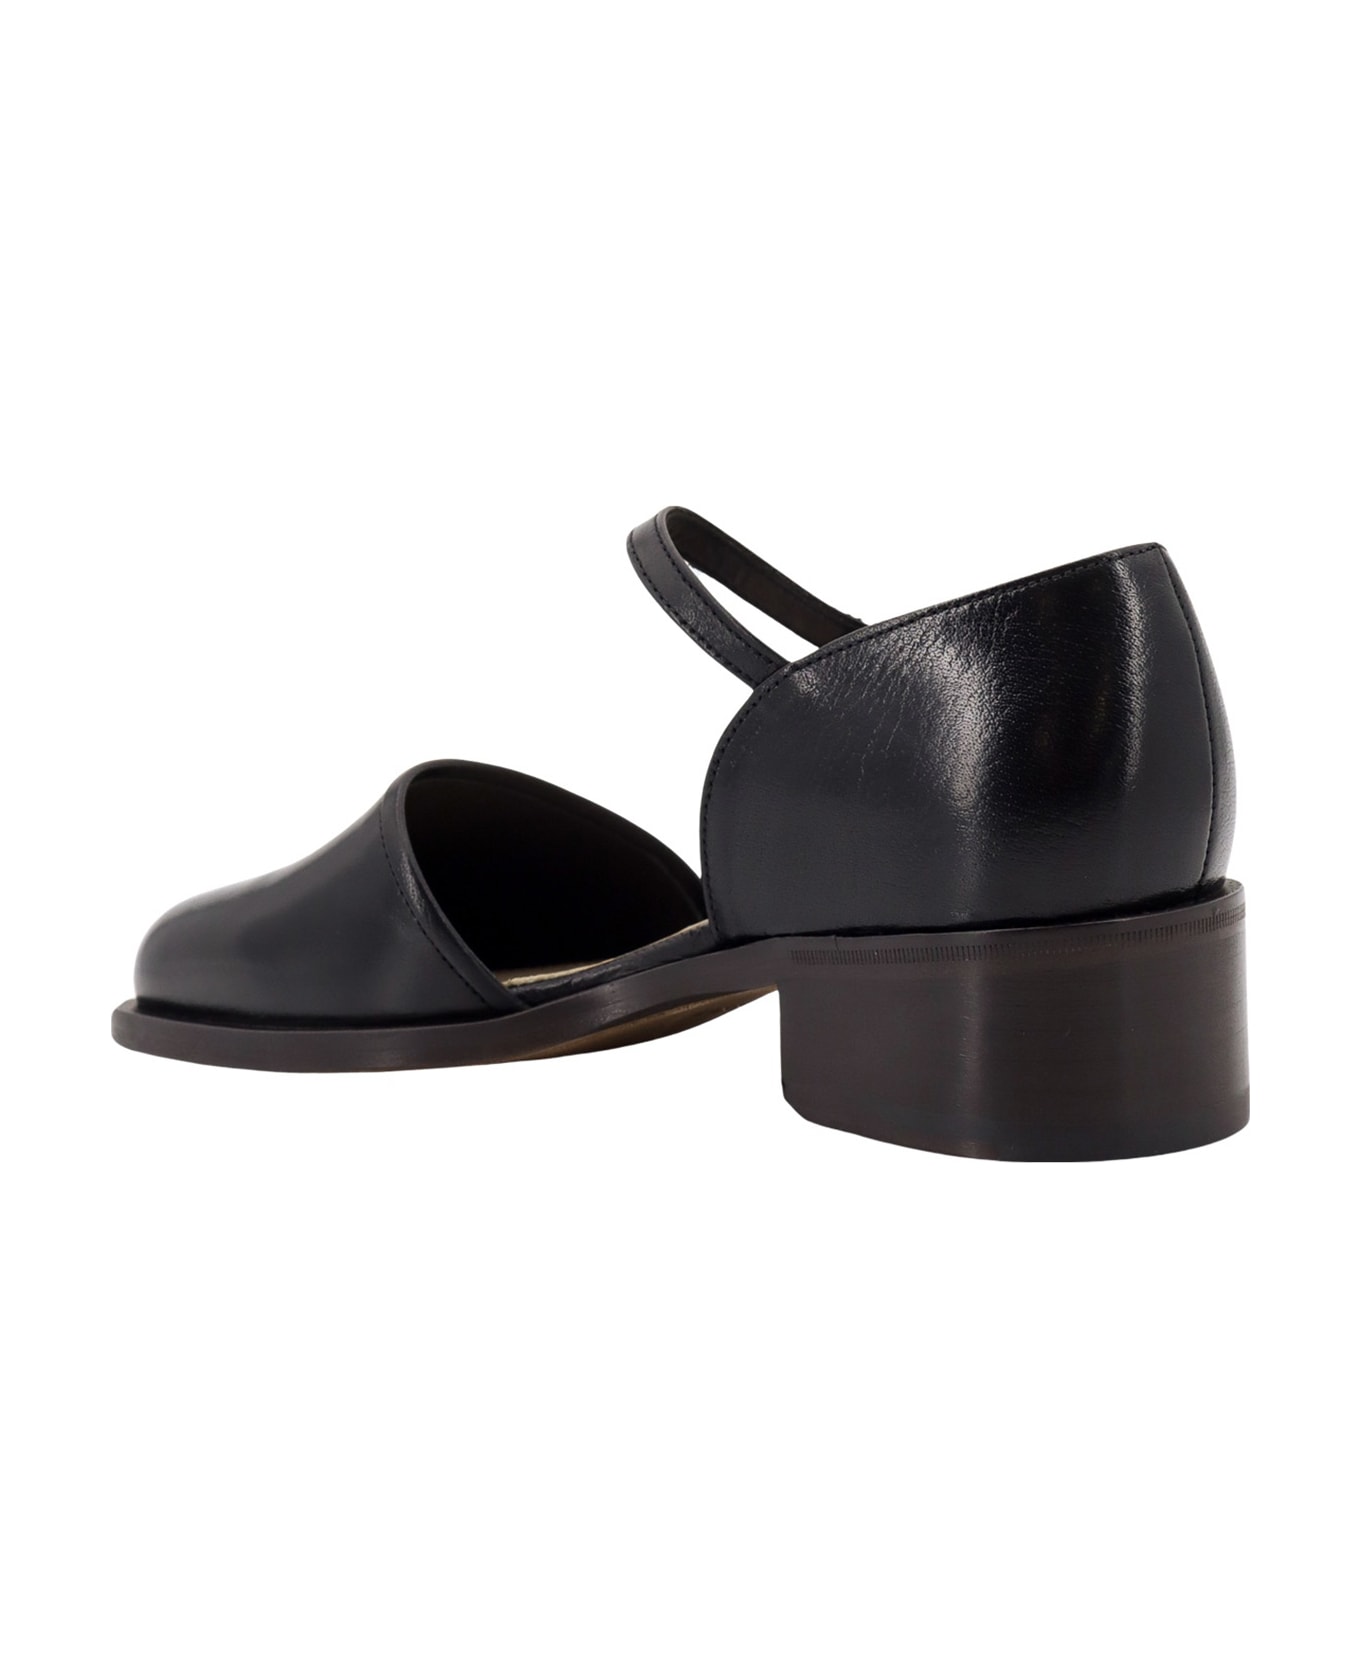 Lemaire Mary Jane Sandals - Black